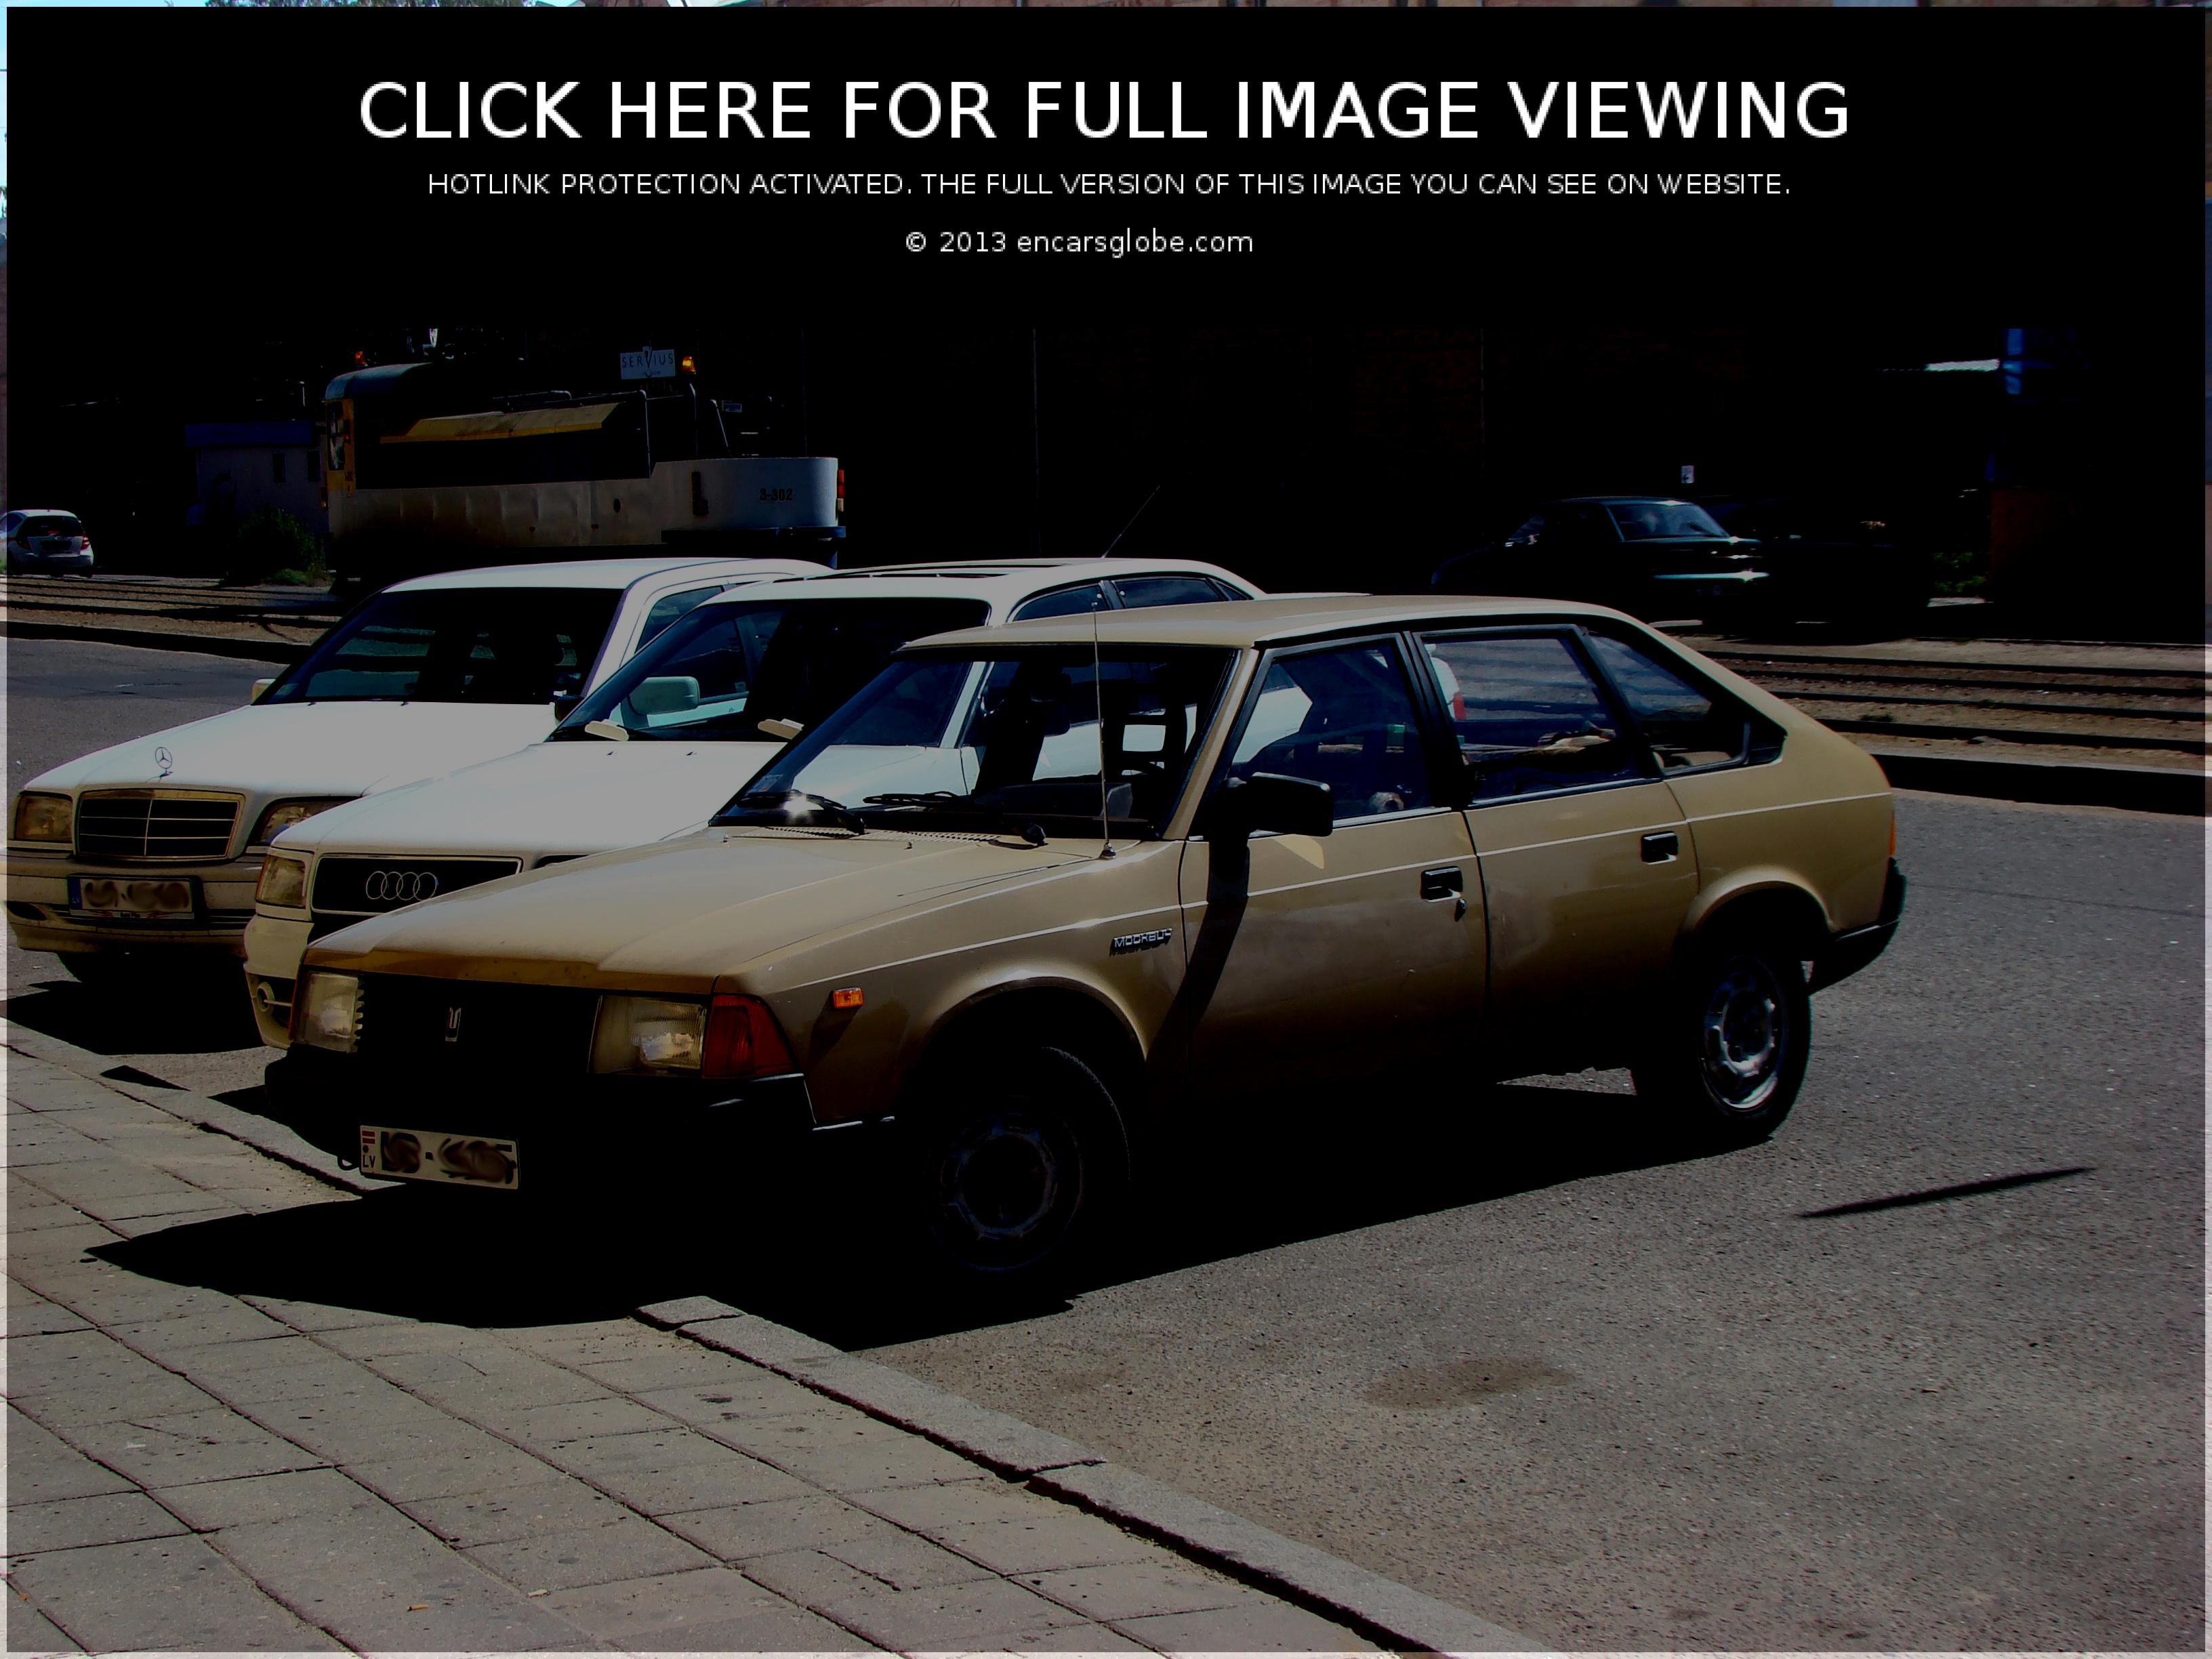 Moskvitch 2141 Photo Gallery: Photo #09 out of 12, Image Size ...